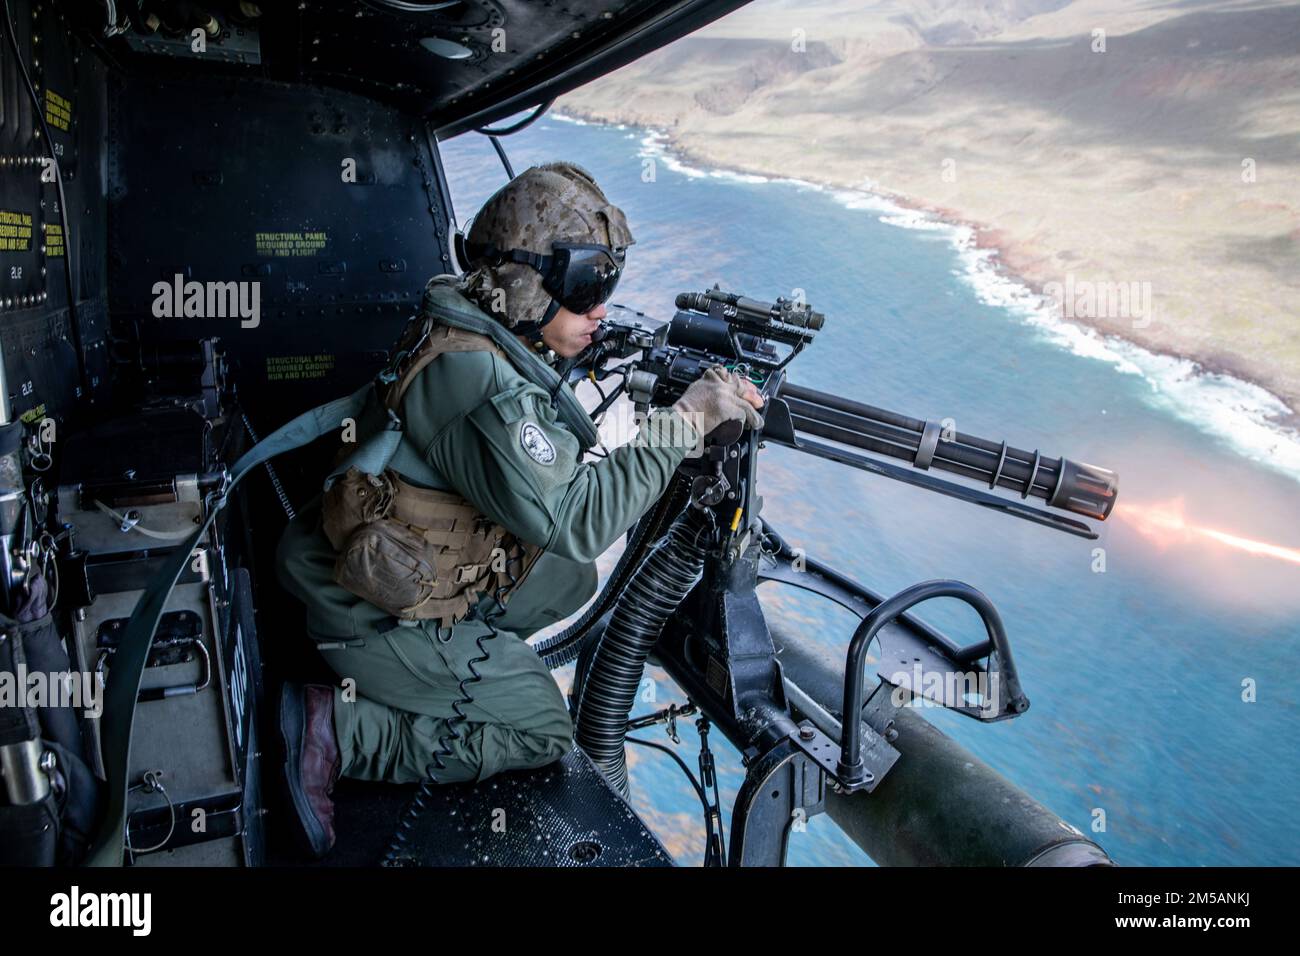 U.S. Marine Corps Sgt. William Ton, a crew chief assigned to Marine Attack Light Attack Helicopter Squadron 469, Marine Aircraft Group 39, 3rd Marine Aircraft Wing (MAW), fires a GAU-17 minigun during a live fire range on a UH-1Y Venom at San Clemente Island, California, Feb. 16, 2022. Winter Fury 22 provides the Marines of 3rd MAW with realistic, relevant training opportunities necessary to respond to any crisis across the globe and win decisively in a highly contested, maritime conflict. Stock Photo